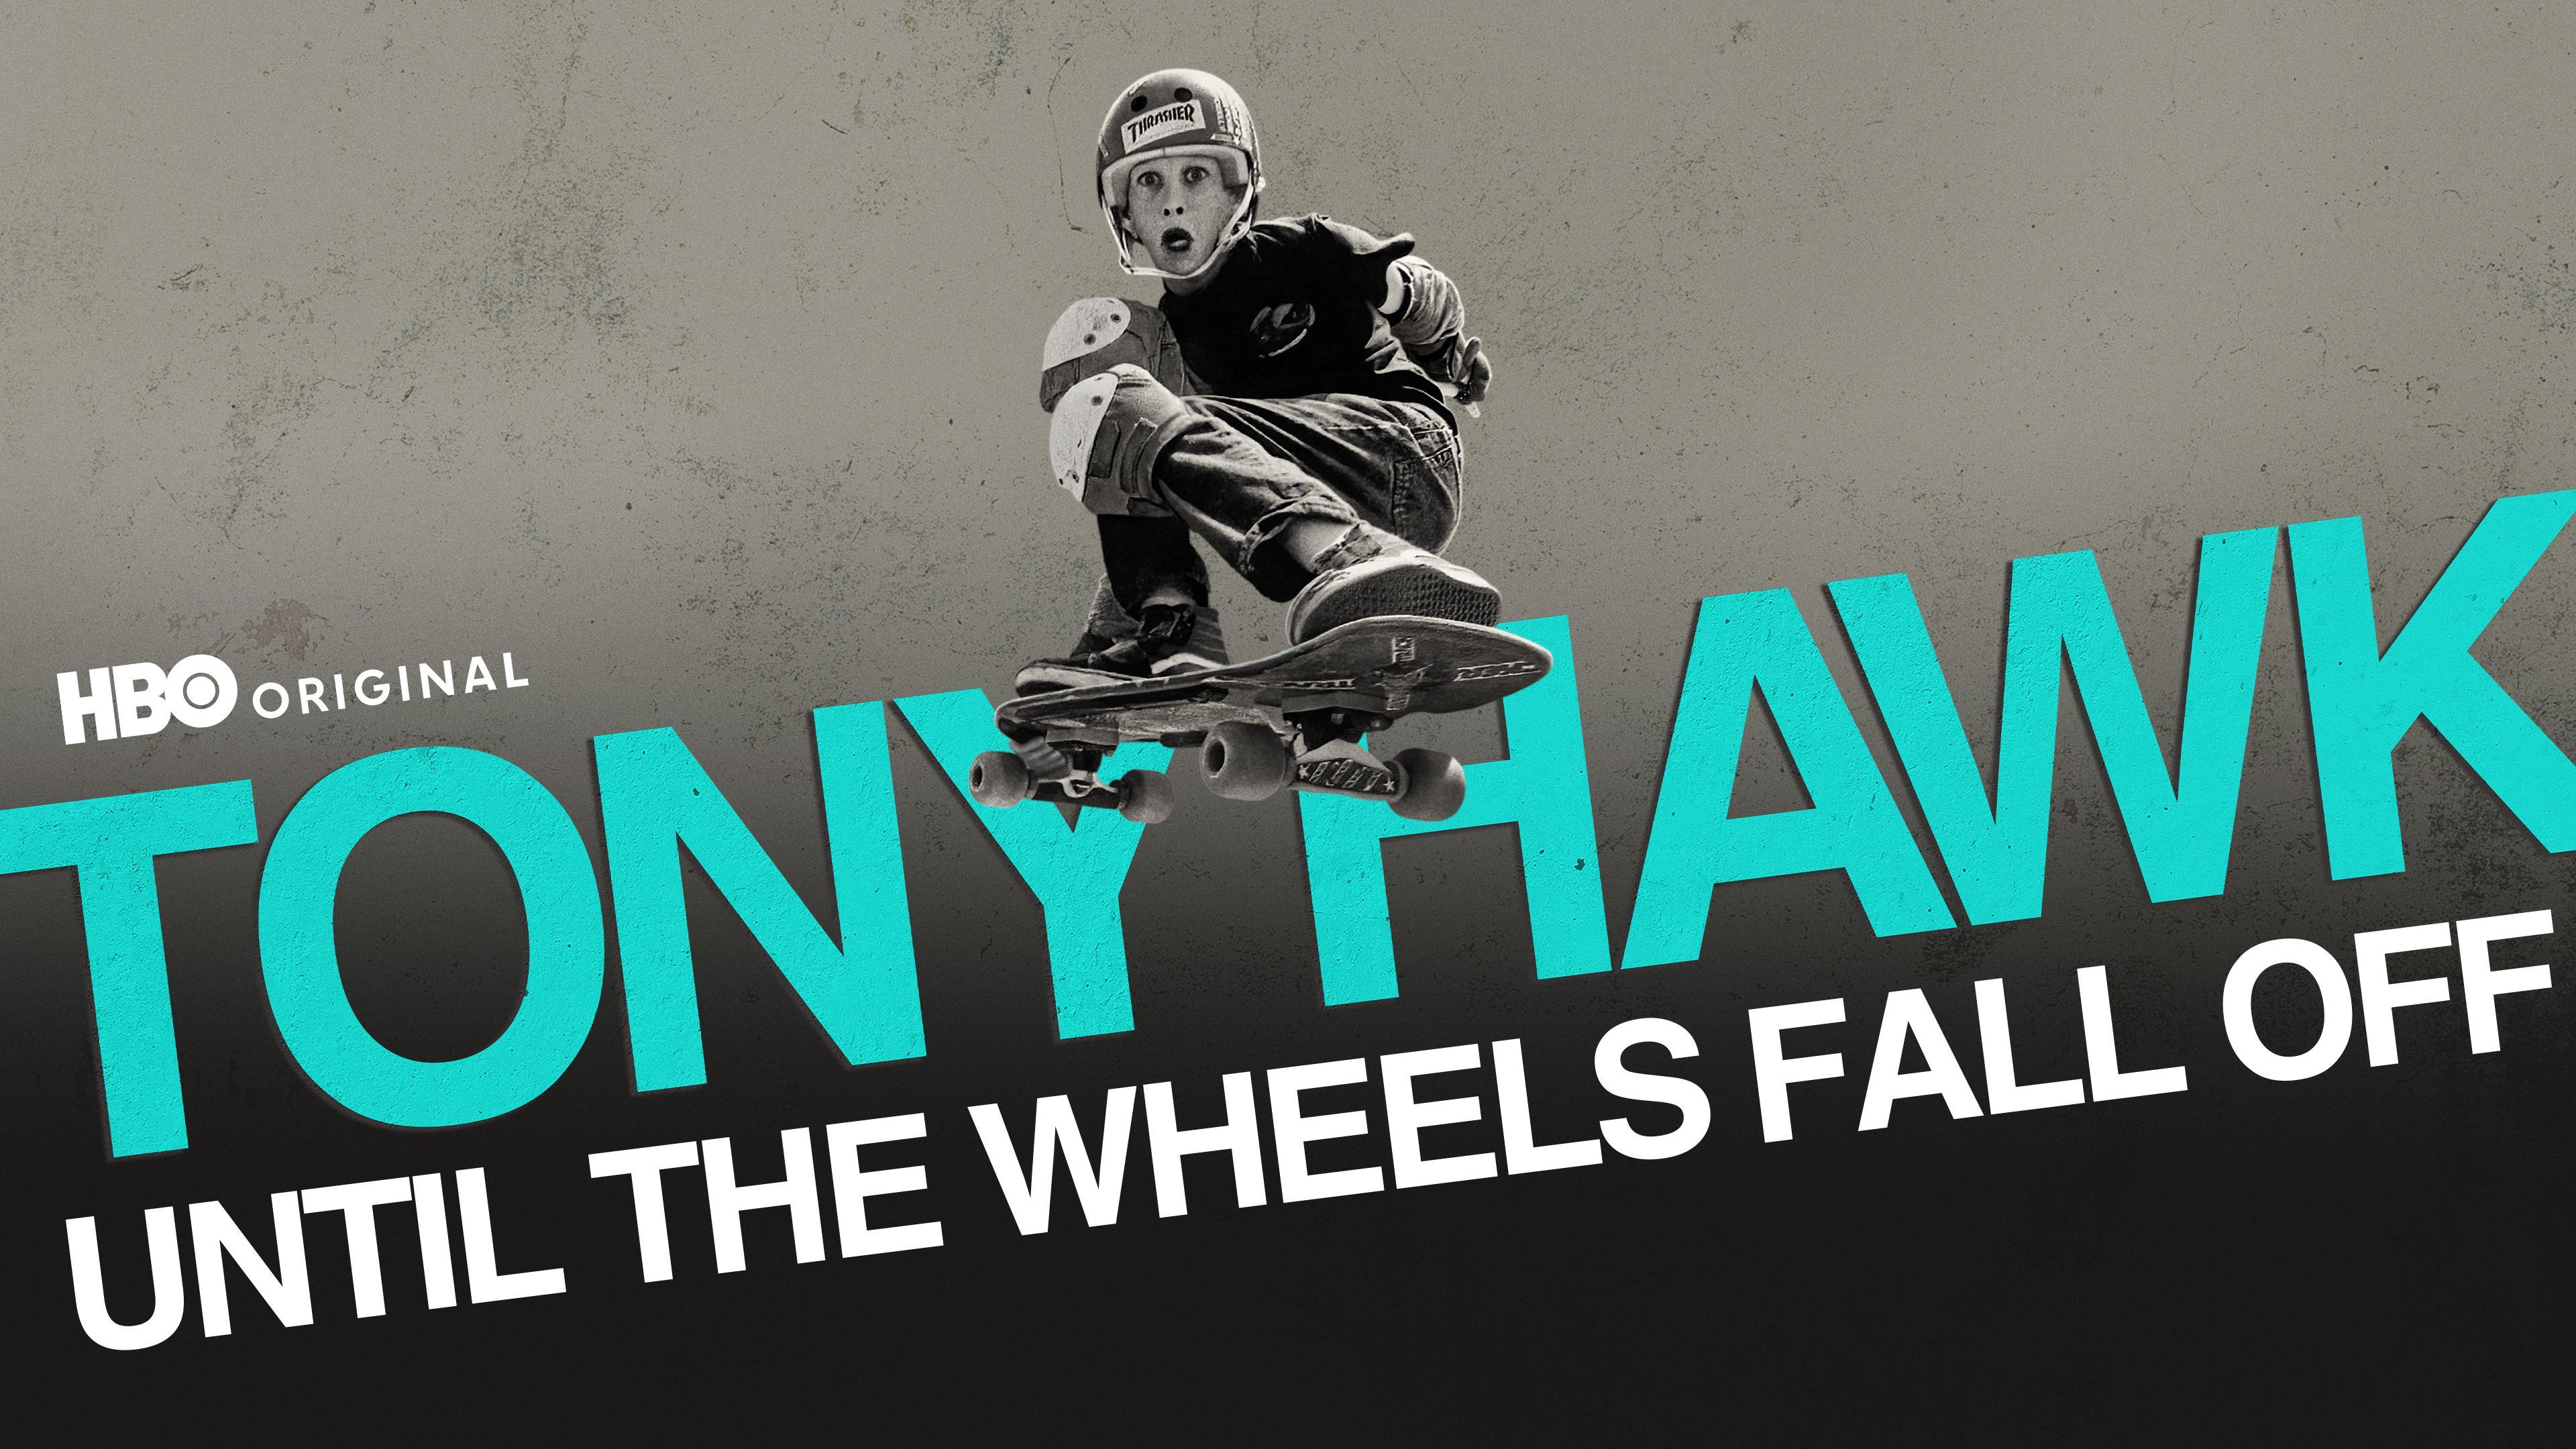 Tony Hawk: Until the Wheels Fall Off, Watch the Movie on HBO